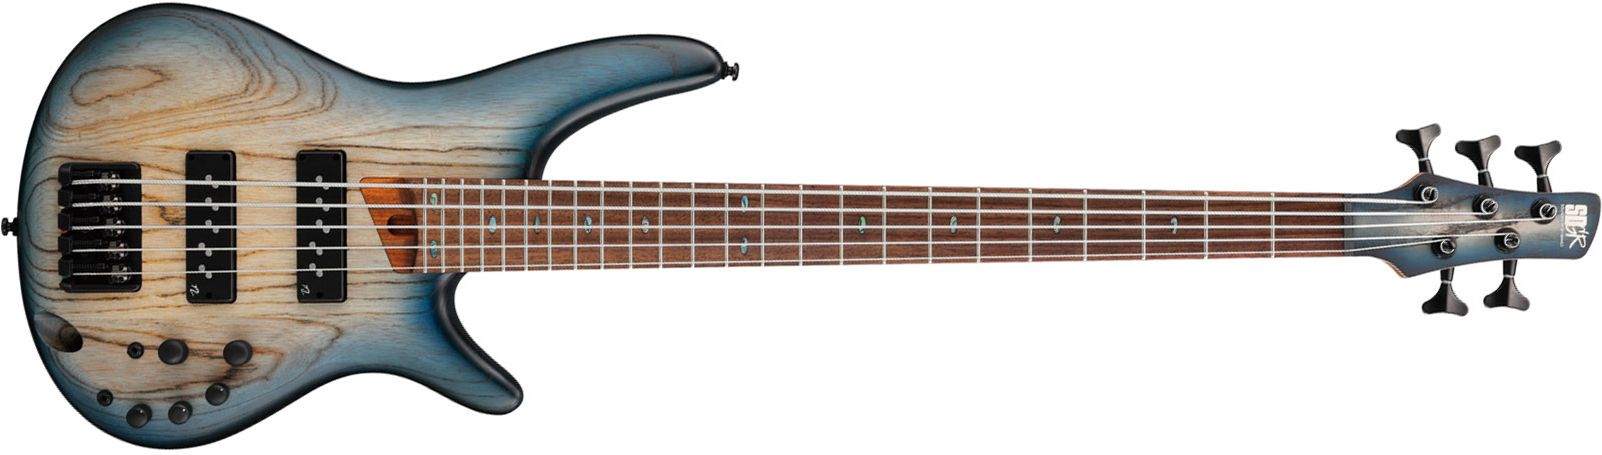 Ibanez Sr605e Ctf Standard 5c Active Rw - Cosmic Blue Starburst Satin - Solid body electric bass - Main picture